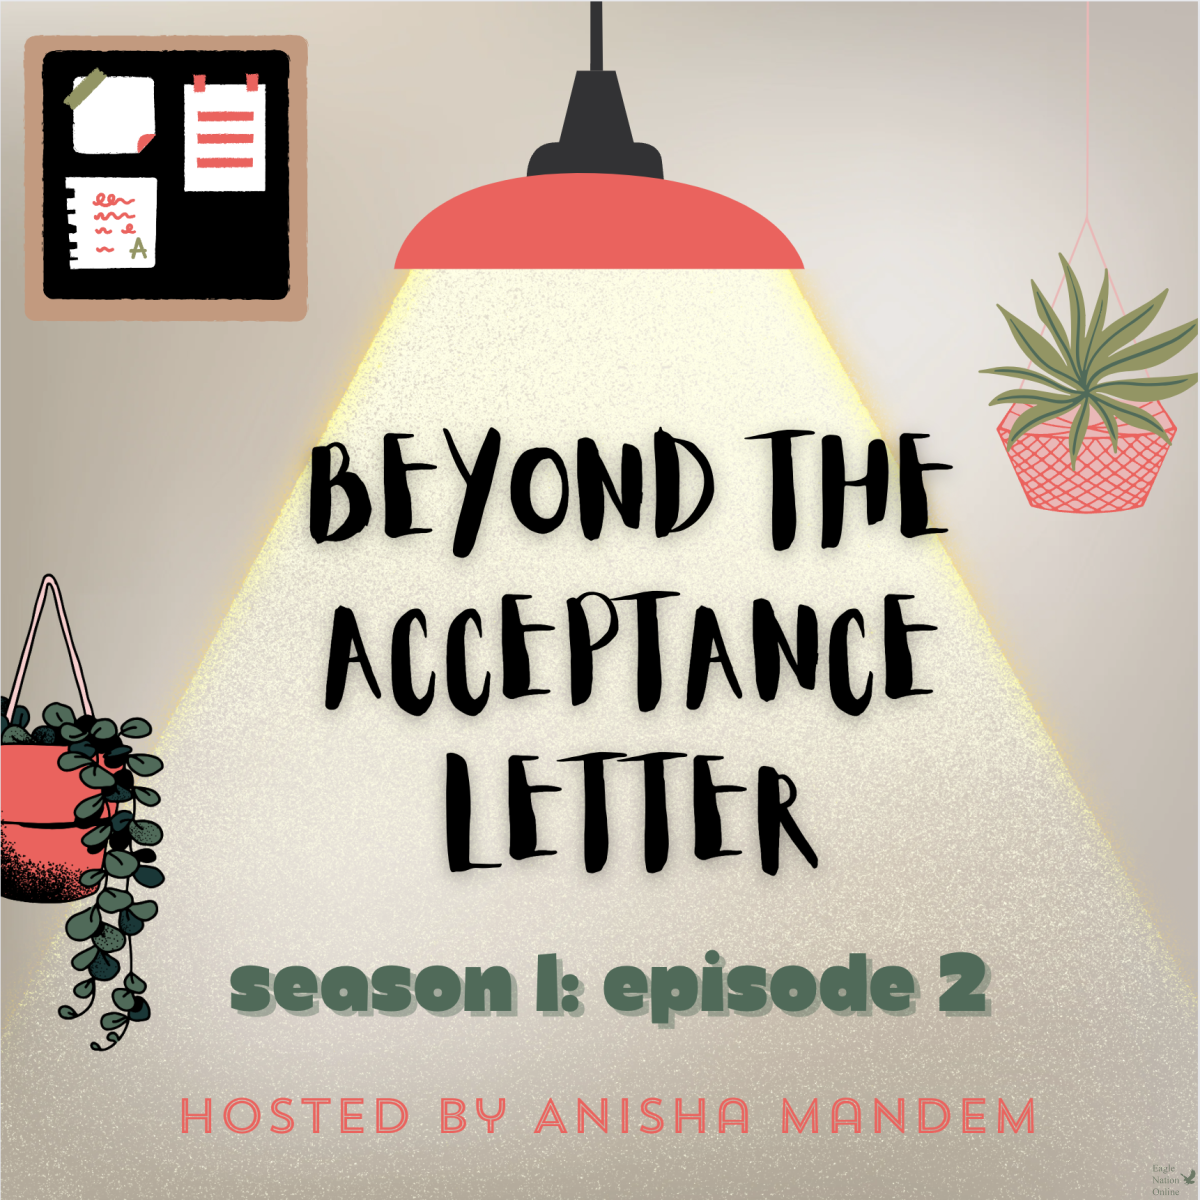 In+the+first+episode+of+Beyond+the+Acceptance+Letter%2C+junior+Anisha+Mandem+interviews+senior+Riley+Wanasek+as+she+talks+about+her+experiences+with+graduating+her+and+advice+on+how+to+balance+school+and+social+life.+